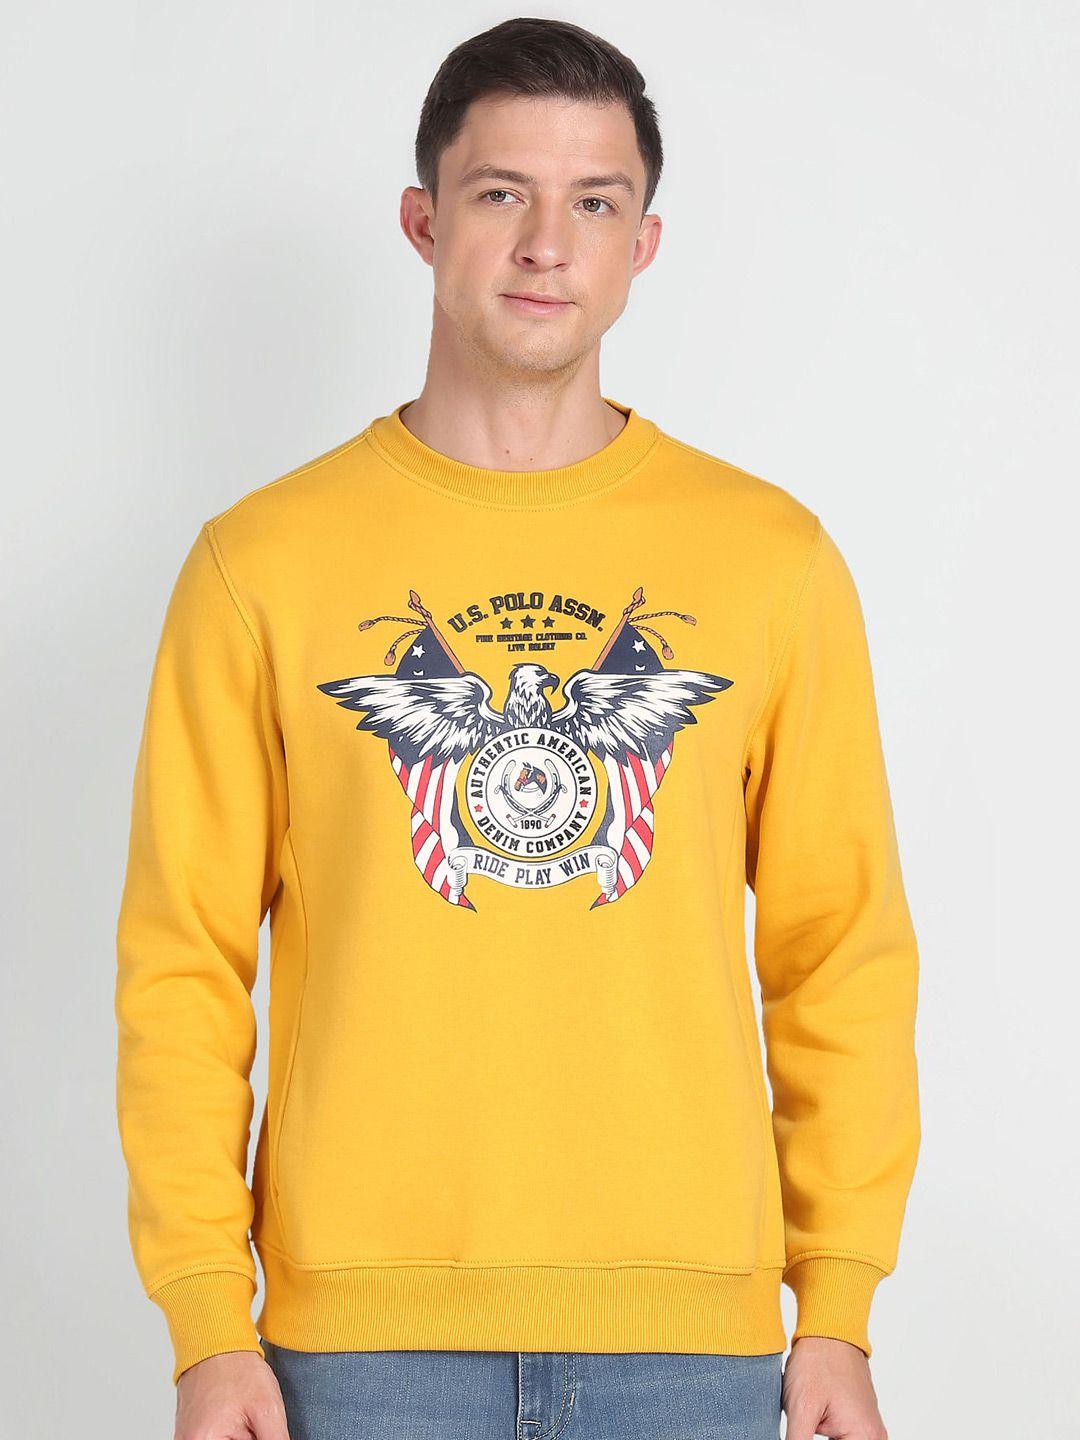 u.s.-polo-assn.-denim-co.-graphic-printed-pullover